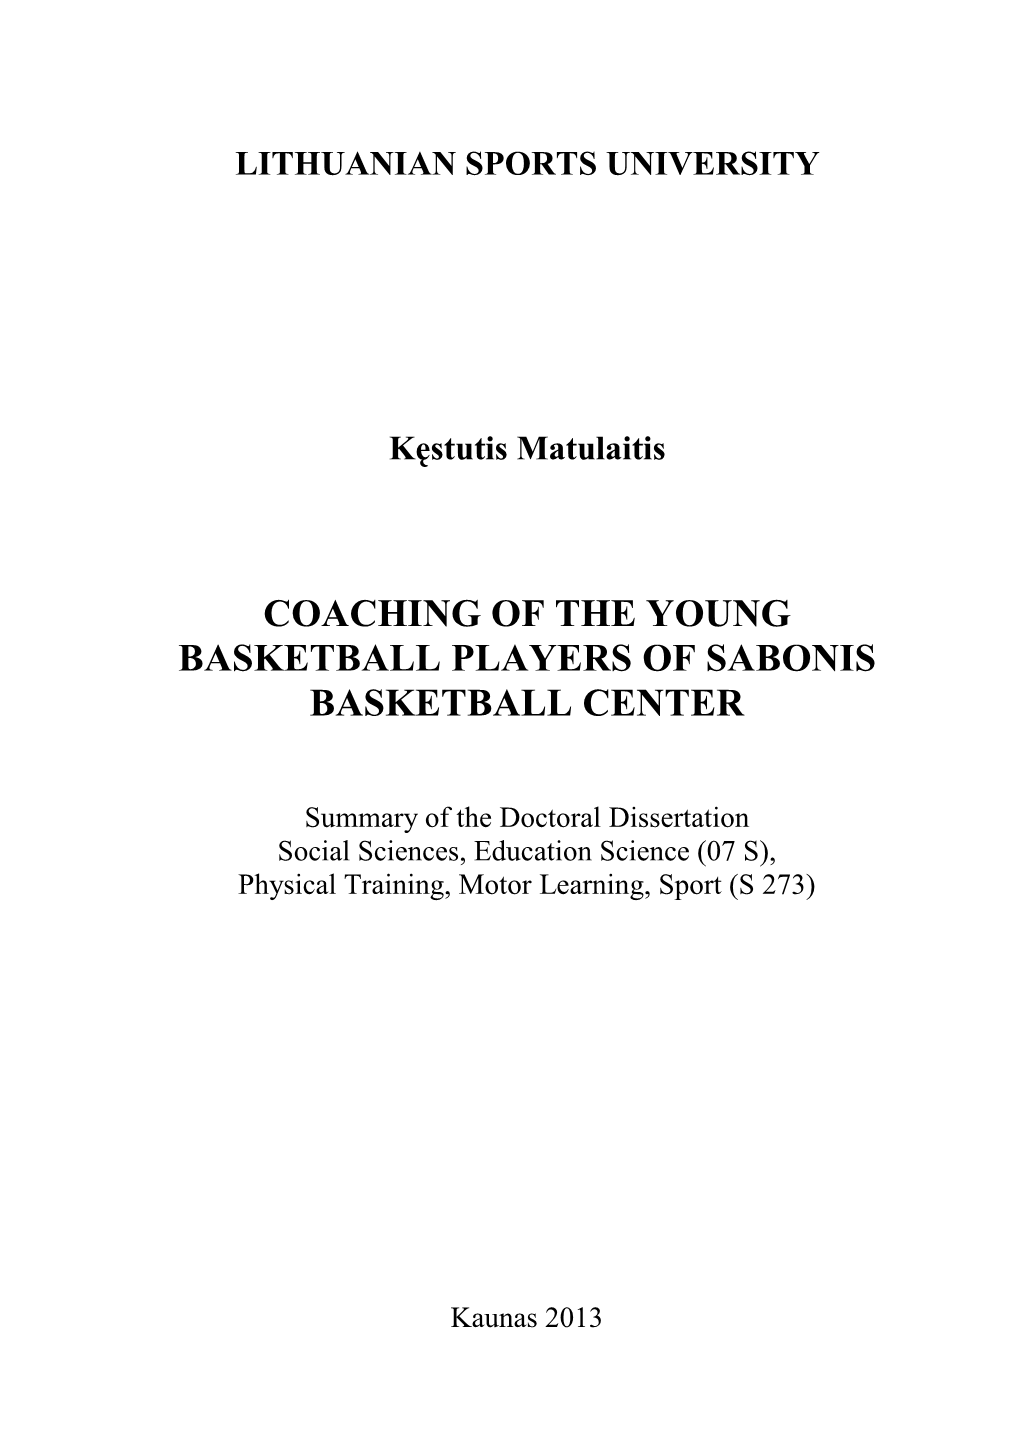 Coaching of the Young Basketball Players of Sabonis Basketball Center